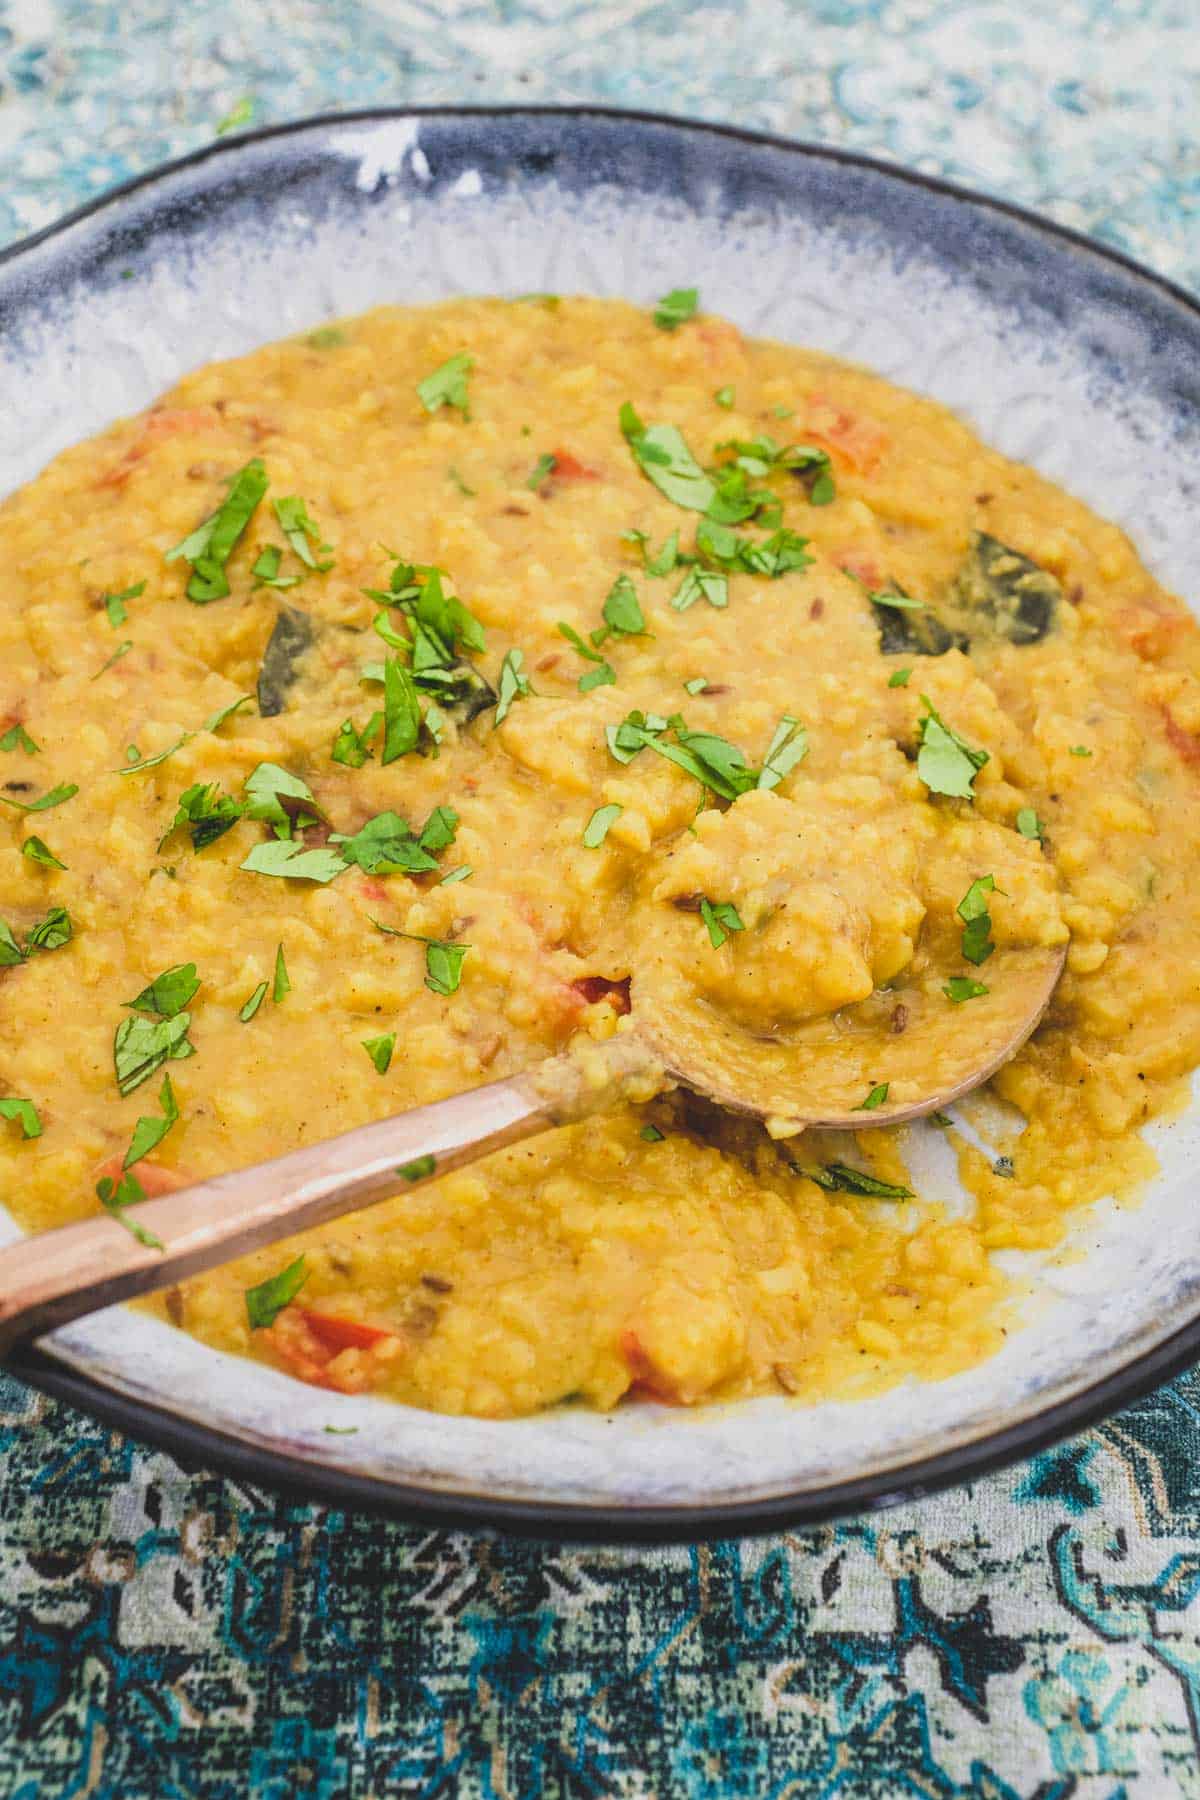 Lentils cooked in spices to make a Punjabi Shahi Daal